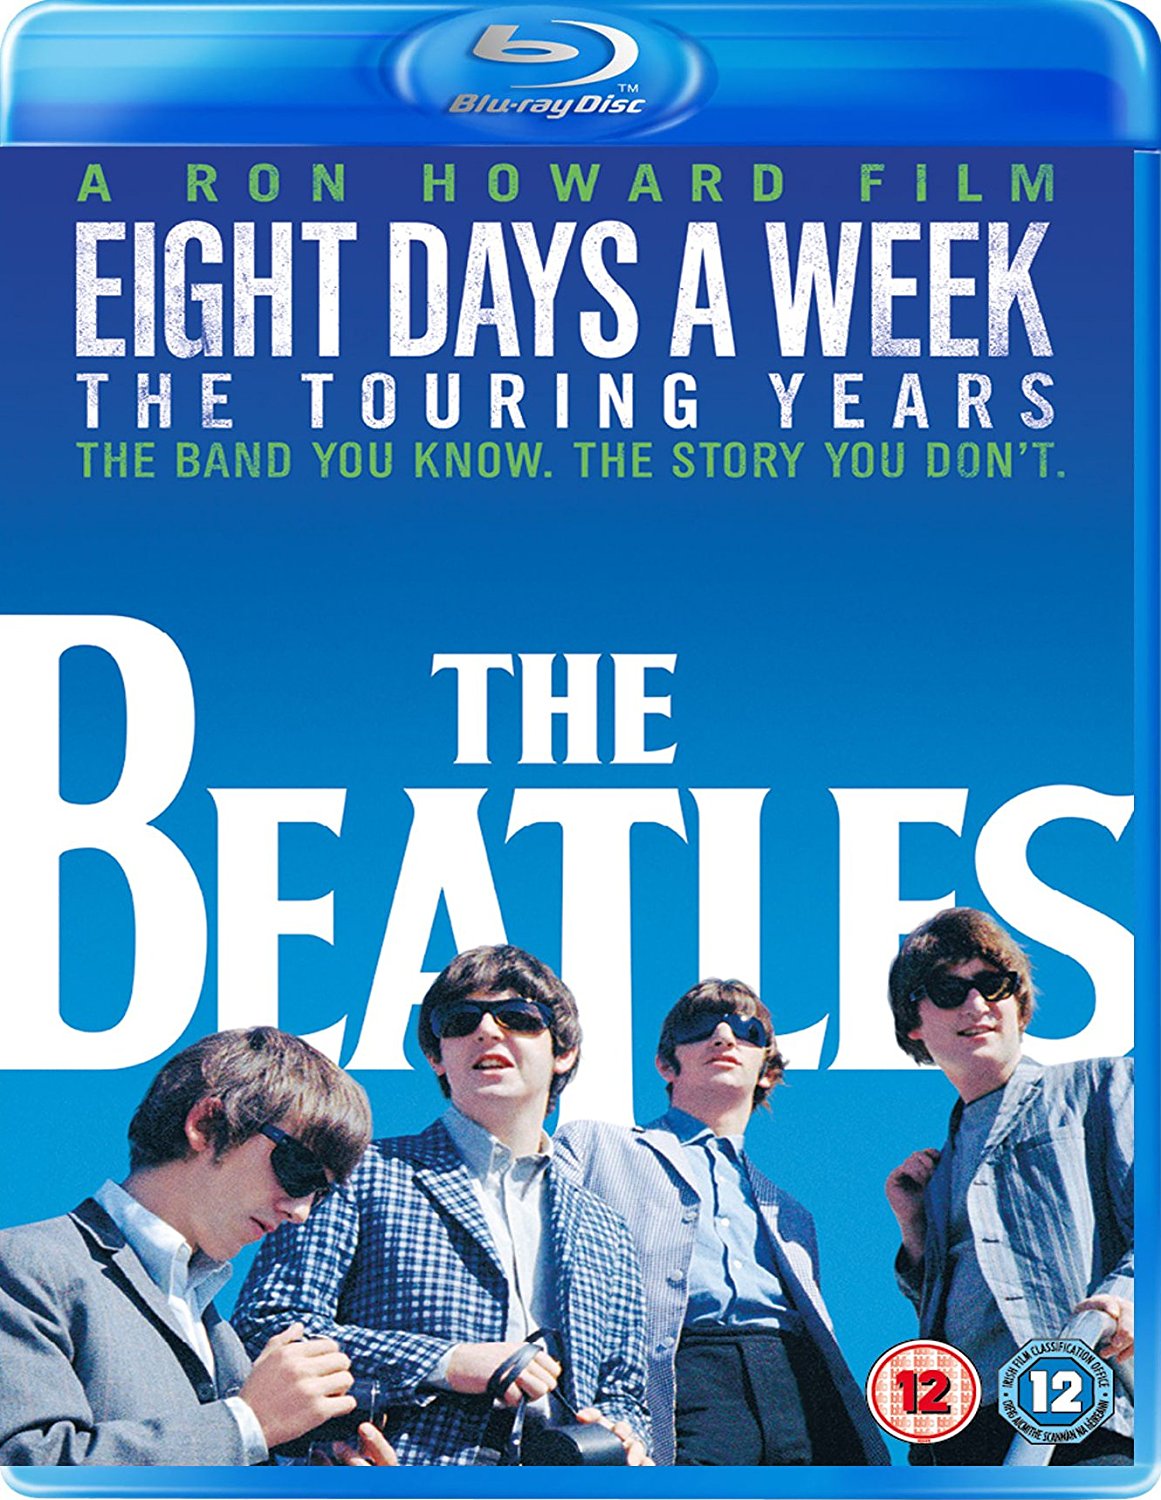 The Beatles: Eight Days a Week - The Touring Years [Blu-ray] [2016] (Blu-ray)